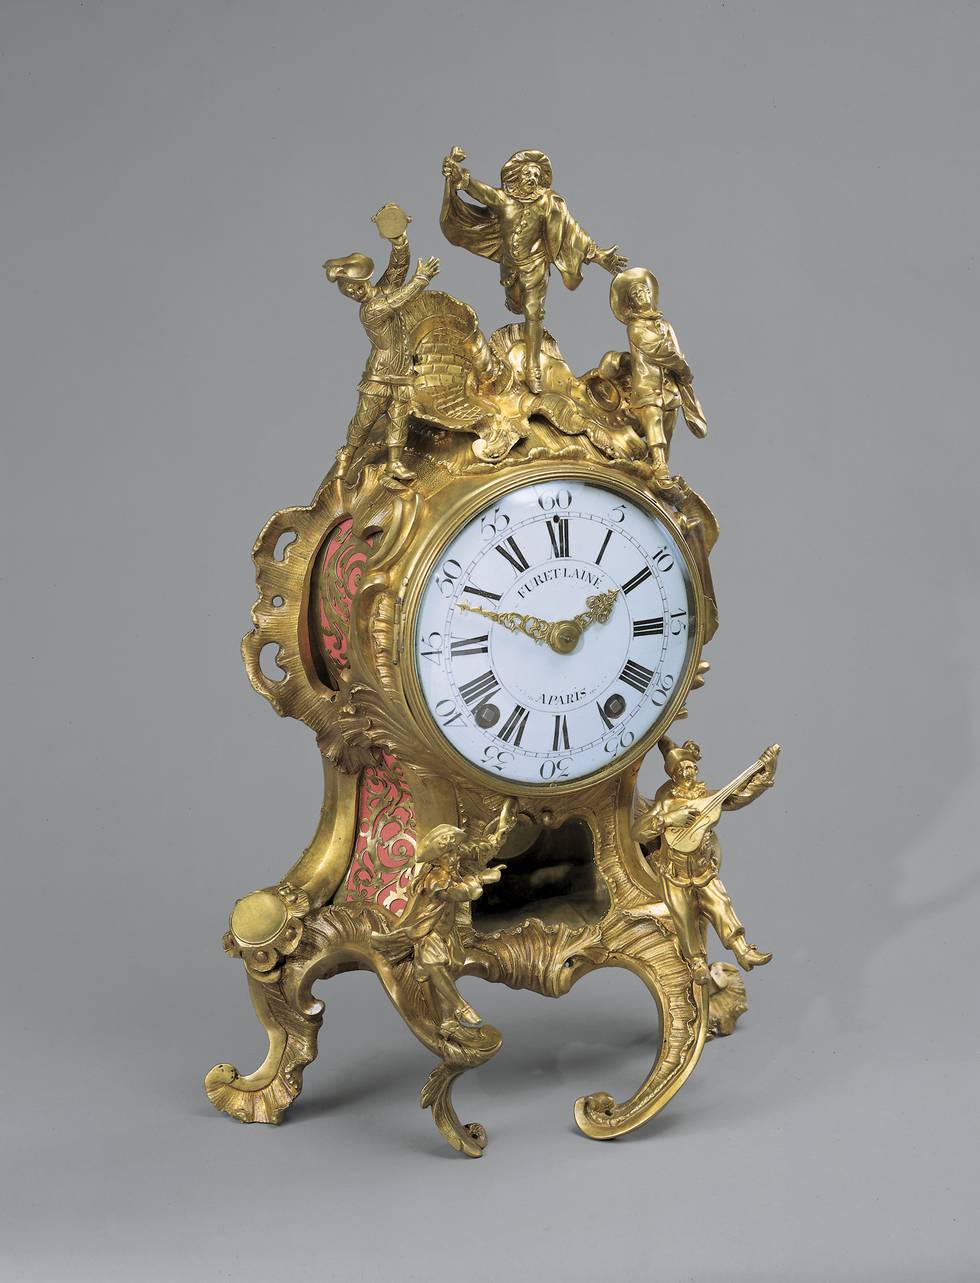 Gilt bronze clock with statues of five comedy figures